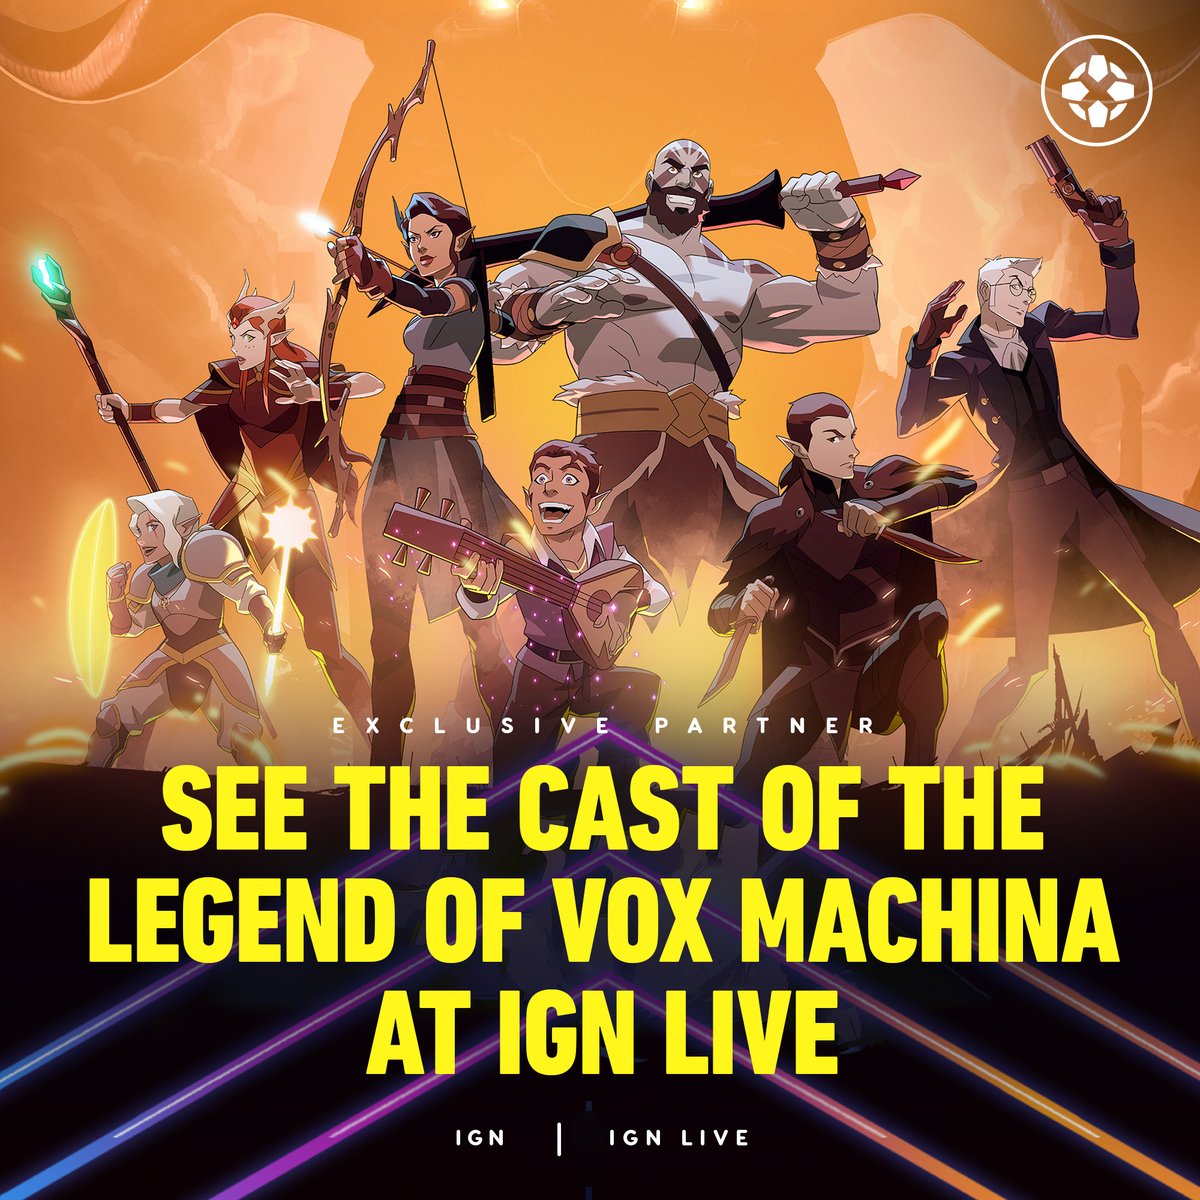 The cast of The Legend of Vox Machina will be in person at IGN Live to reveal an exclusive sneak peek at Season 3! Grab your tickets to the event to make sure you don’t miss out on the fun: bit.ly/3UC6XZm